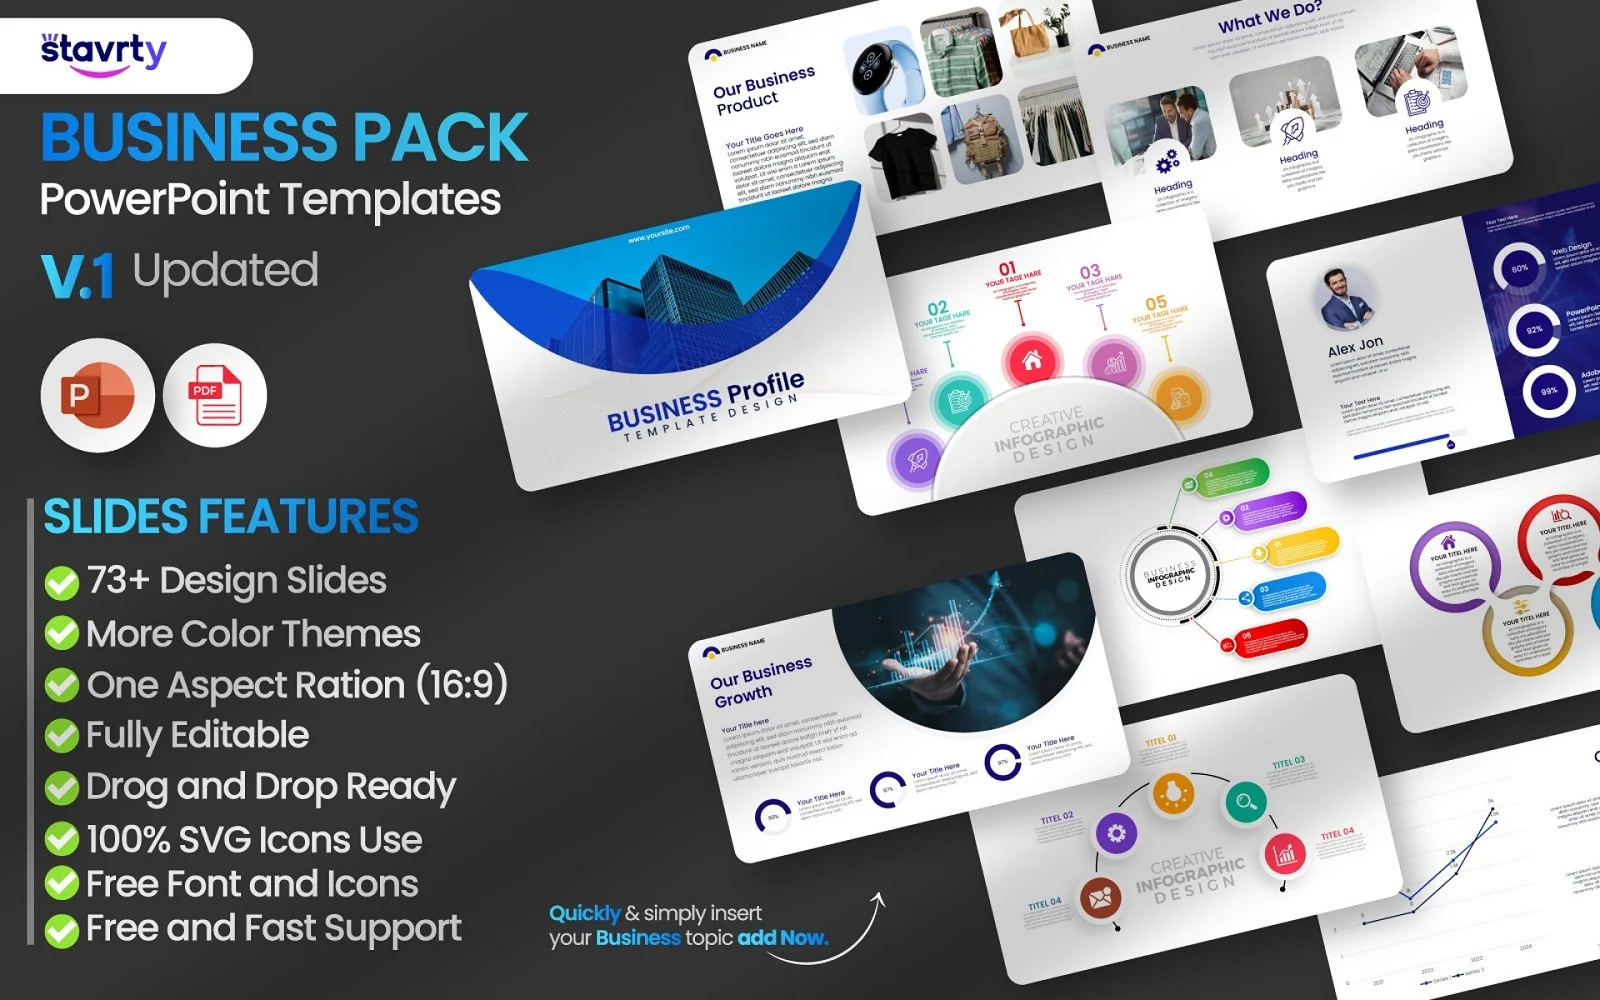 Business Pack PowerPoint Presentation Template V.1 | Stavrty